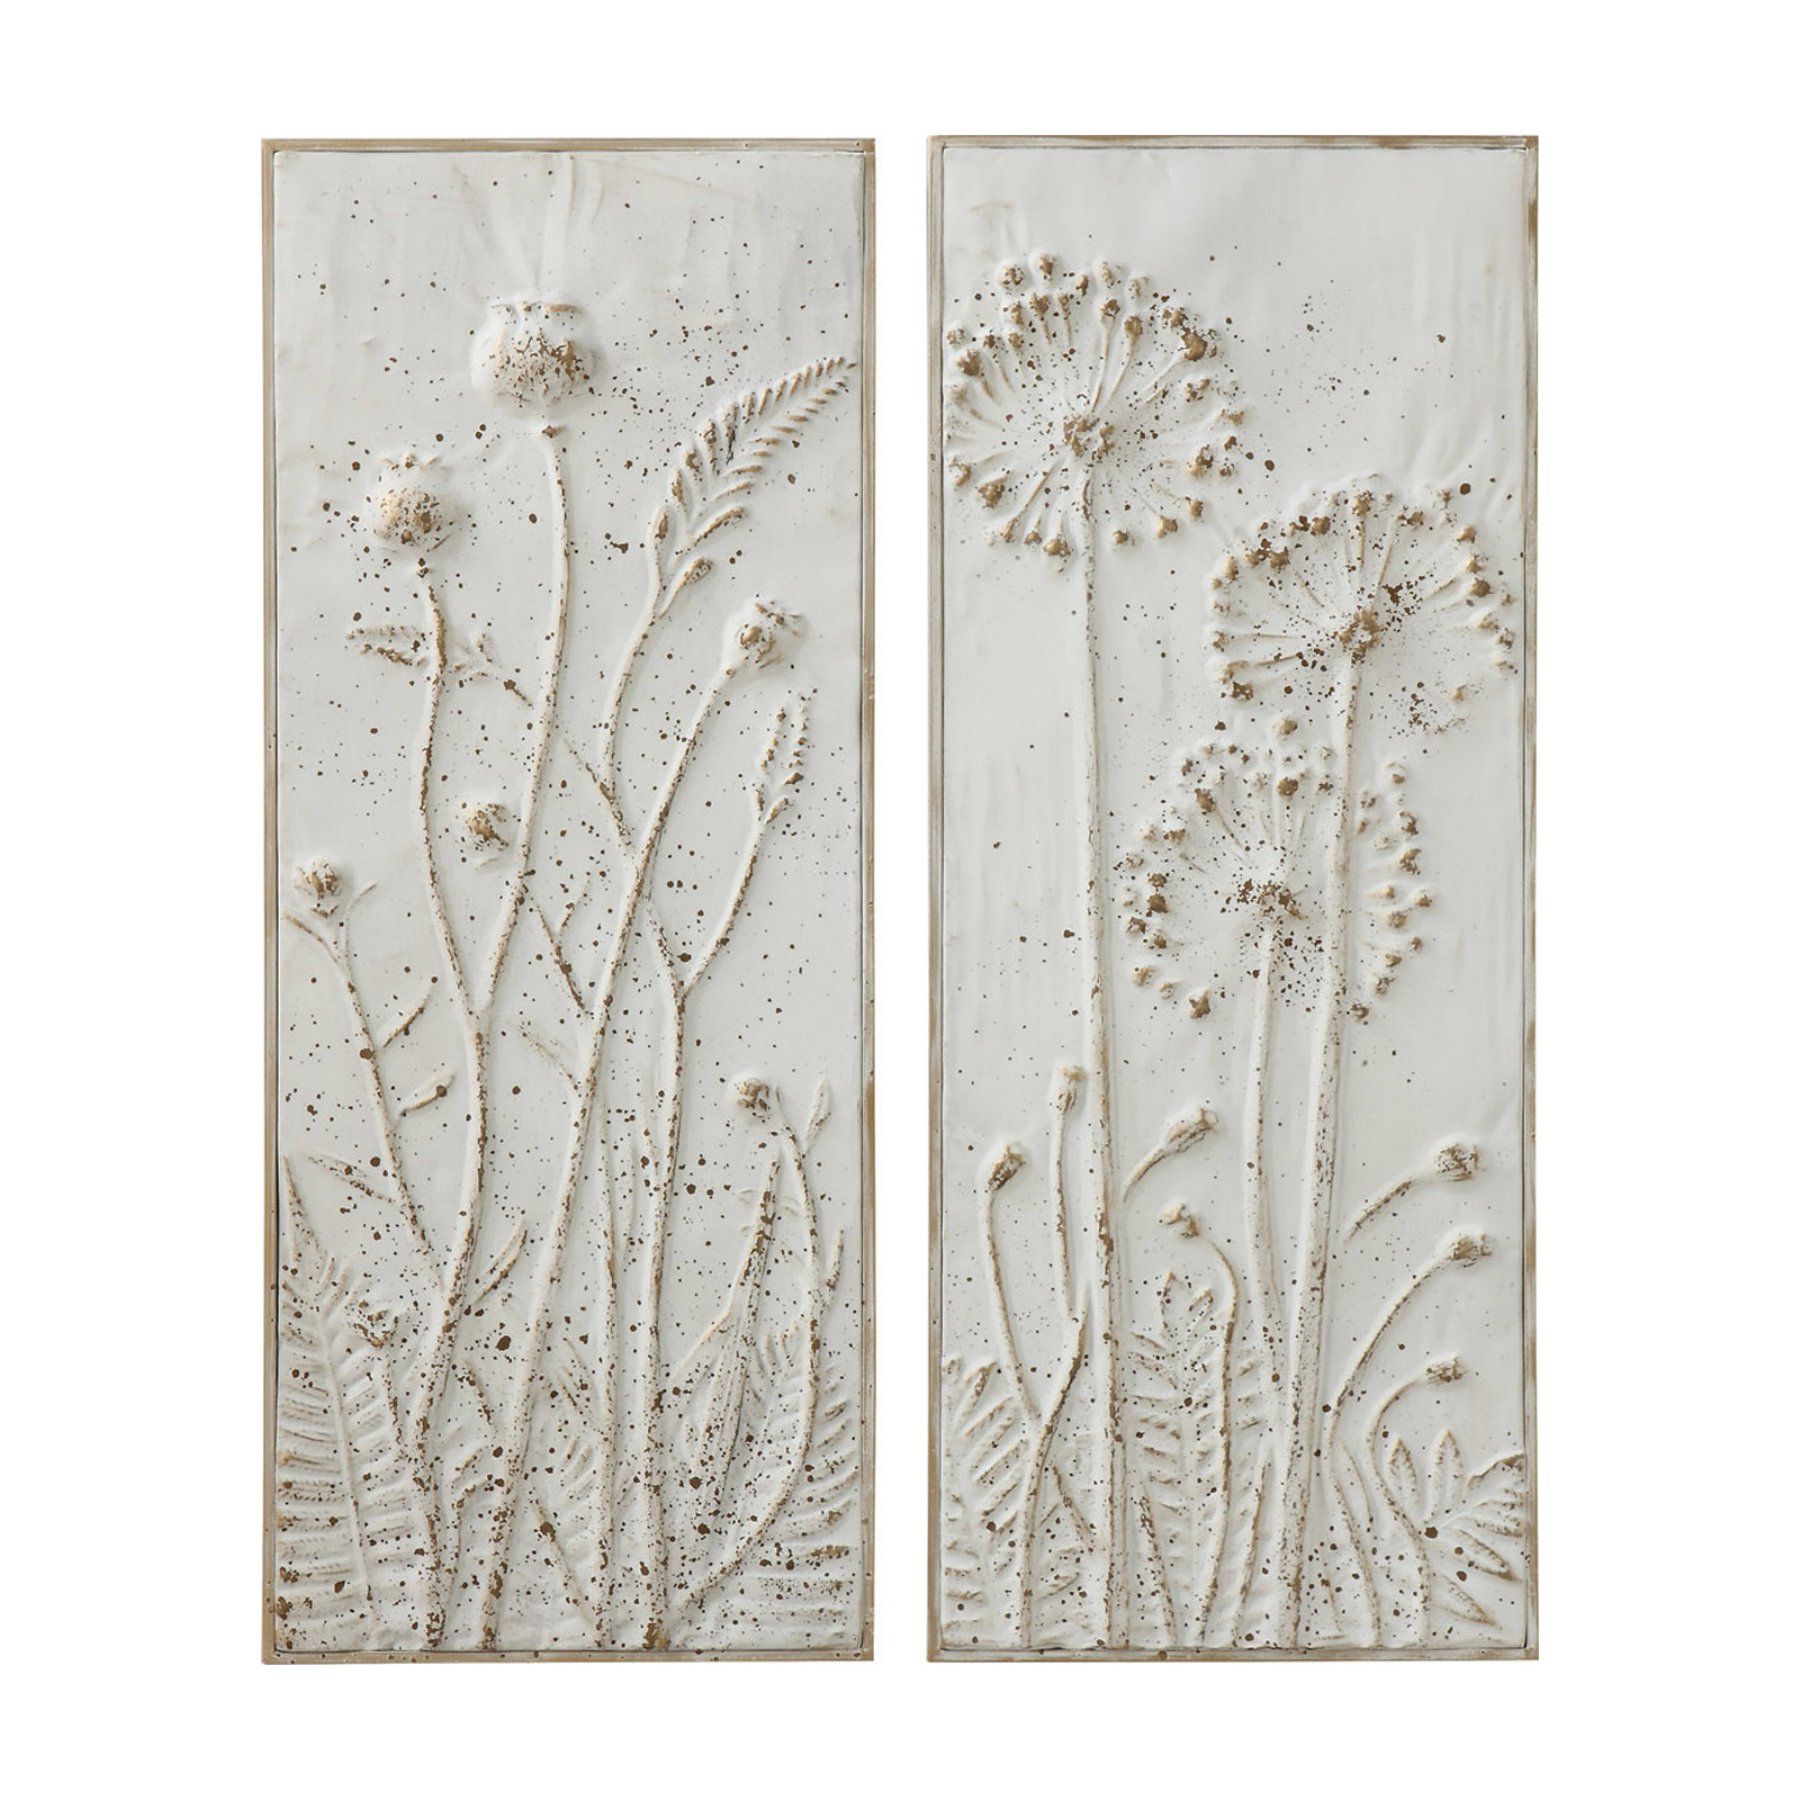 Creative Co Op Metal Wall Decor With Flowers – Set Of 2 For 2 Piece Panel Wood Wall Decor Sets (set Of 2) (View 12 of 30)